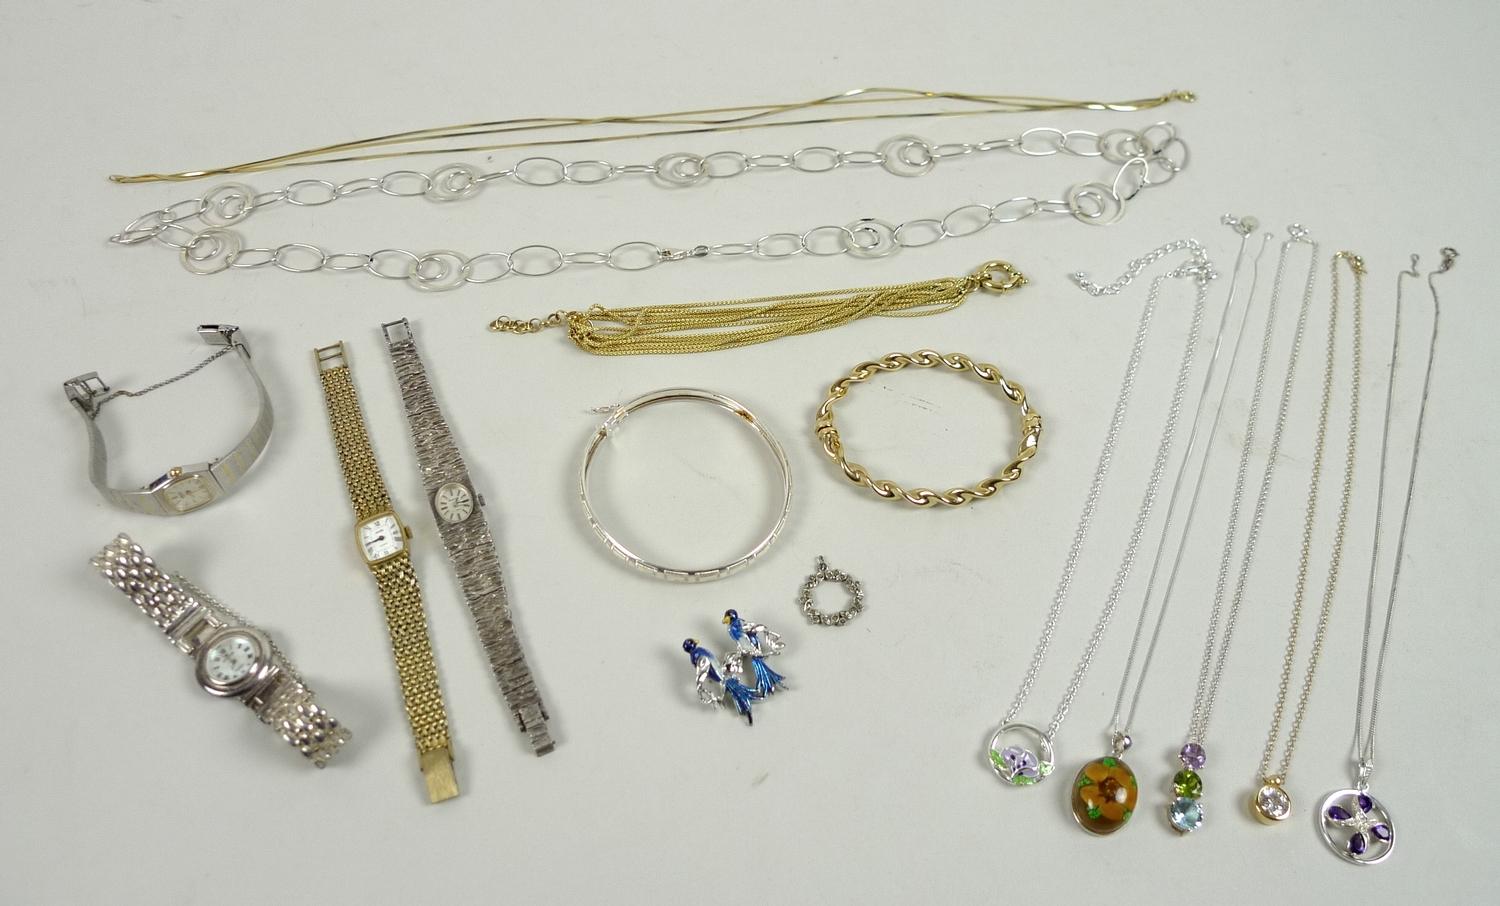 A collection of silver jewellery and wristwatches, including watches by Seiko and Accurist, and a